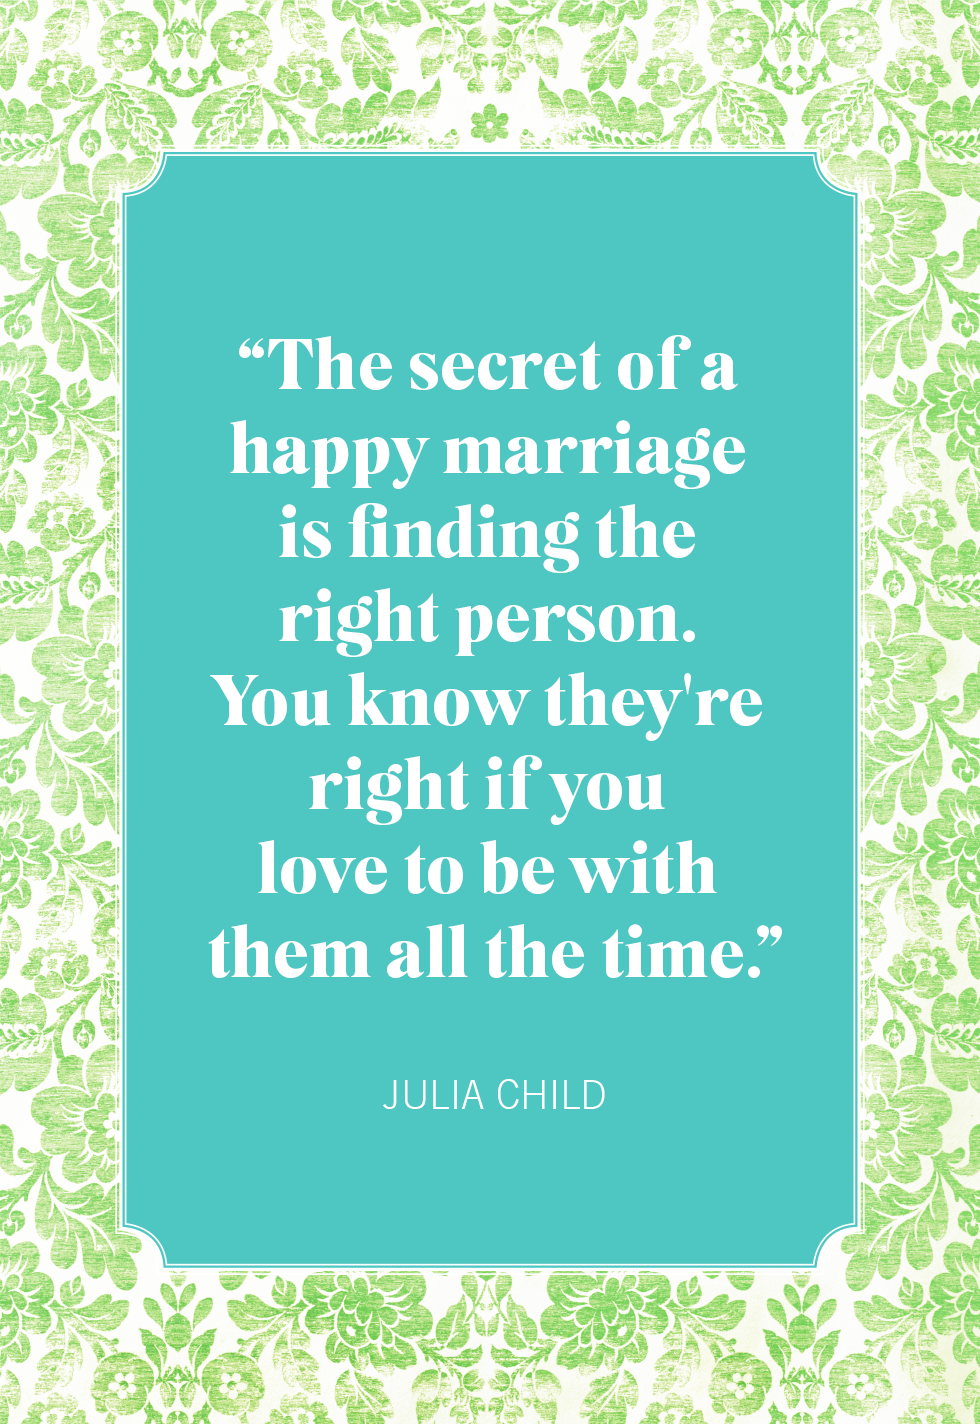 wedding quotes and sayings